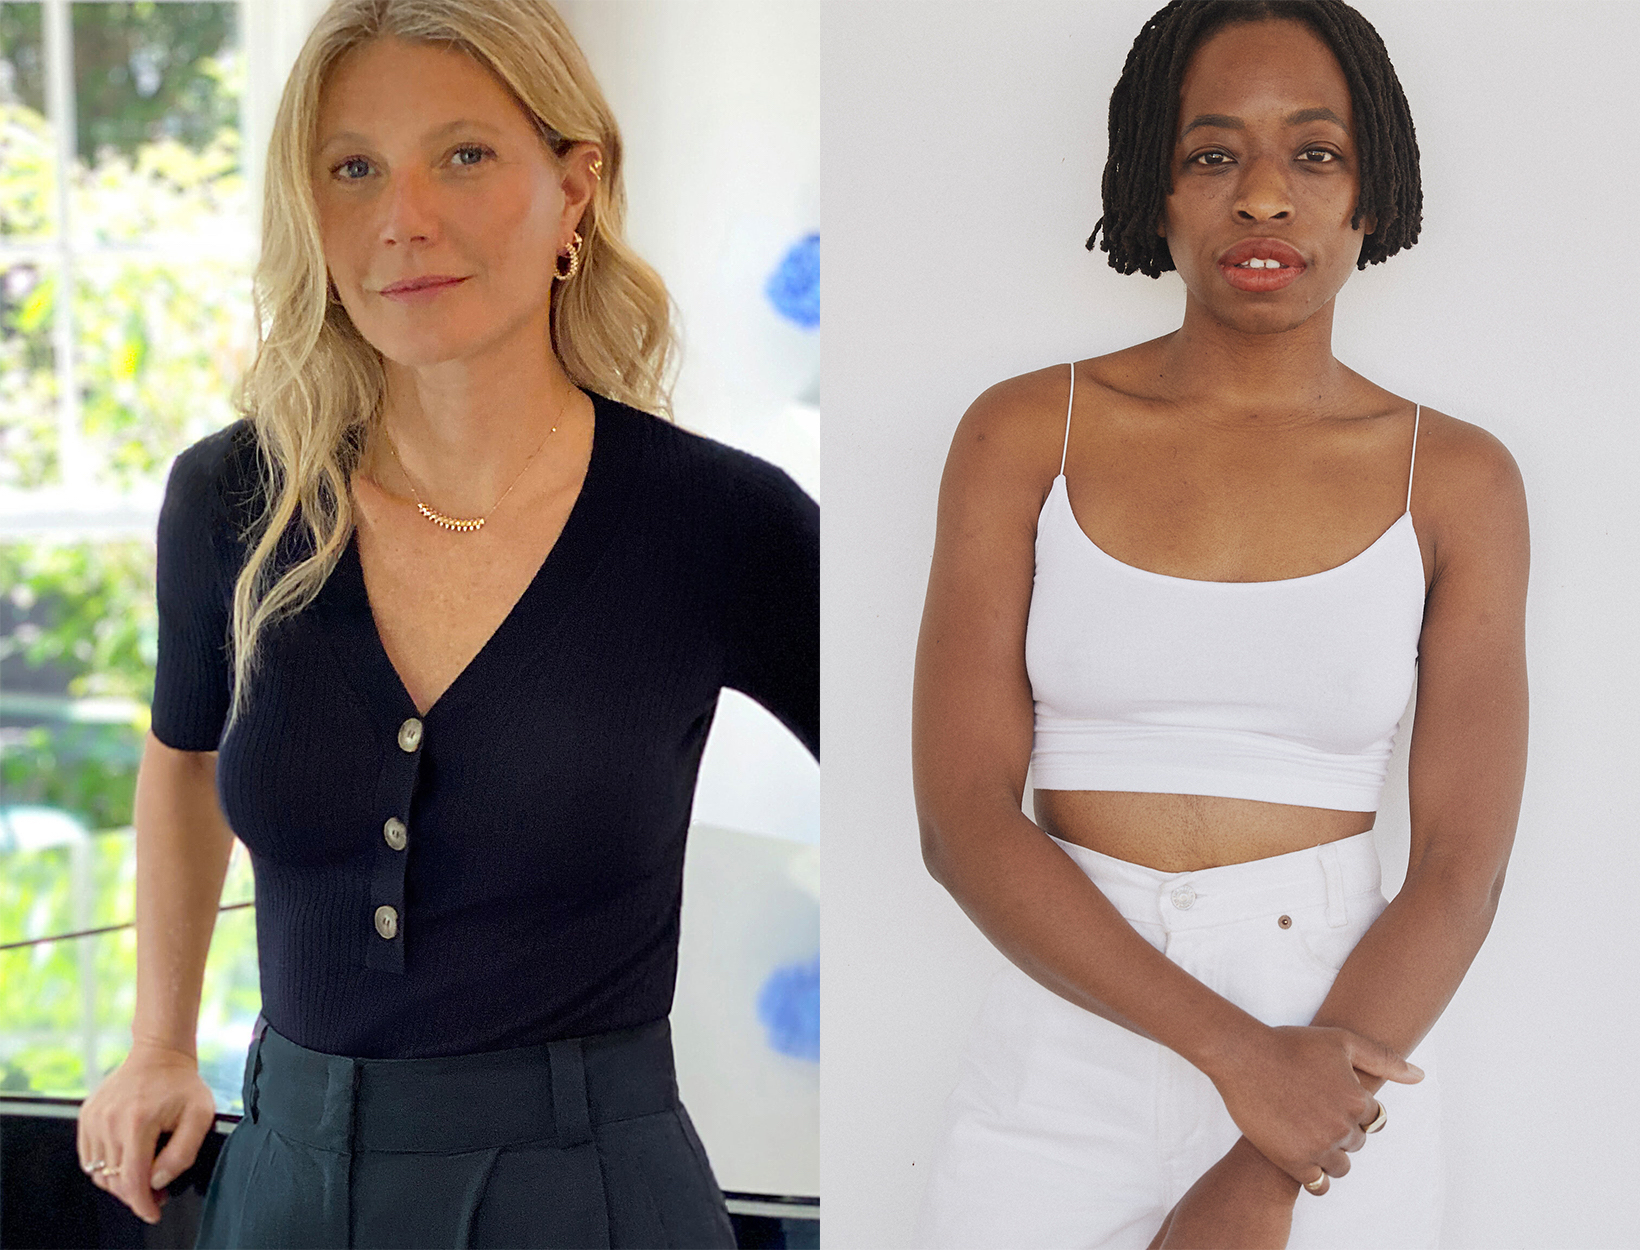 Sanely Xxx Video Sex - Gwyneth Paltrow x Erica Chidi: Skin-to-Skin Contact, Internal Family  Systems, and Other Things We're Into | goop